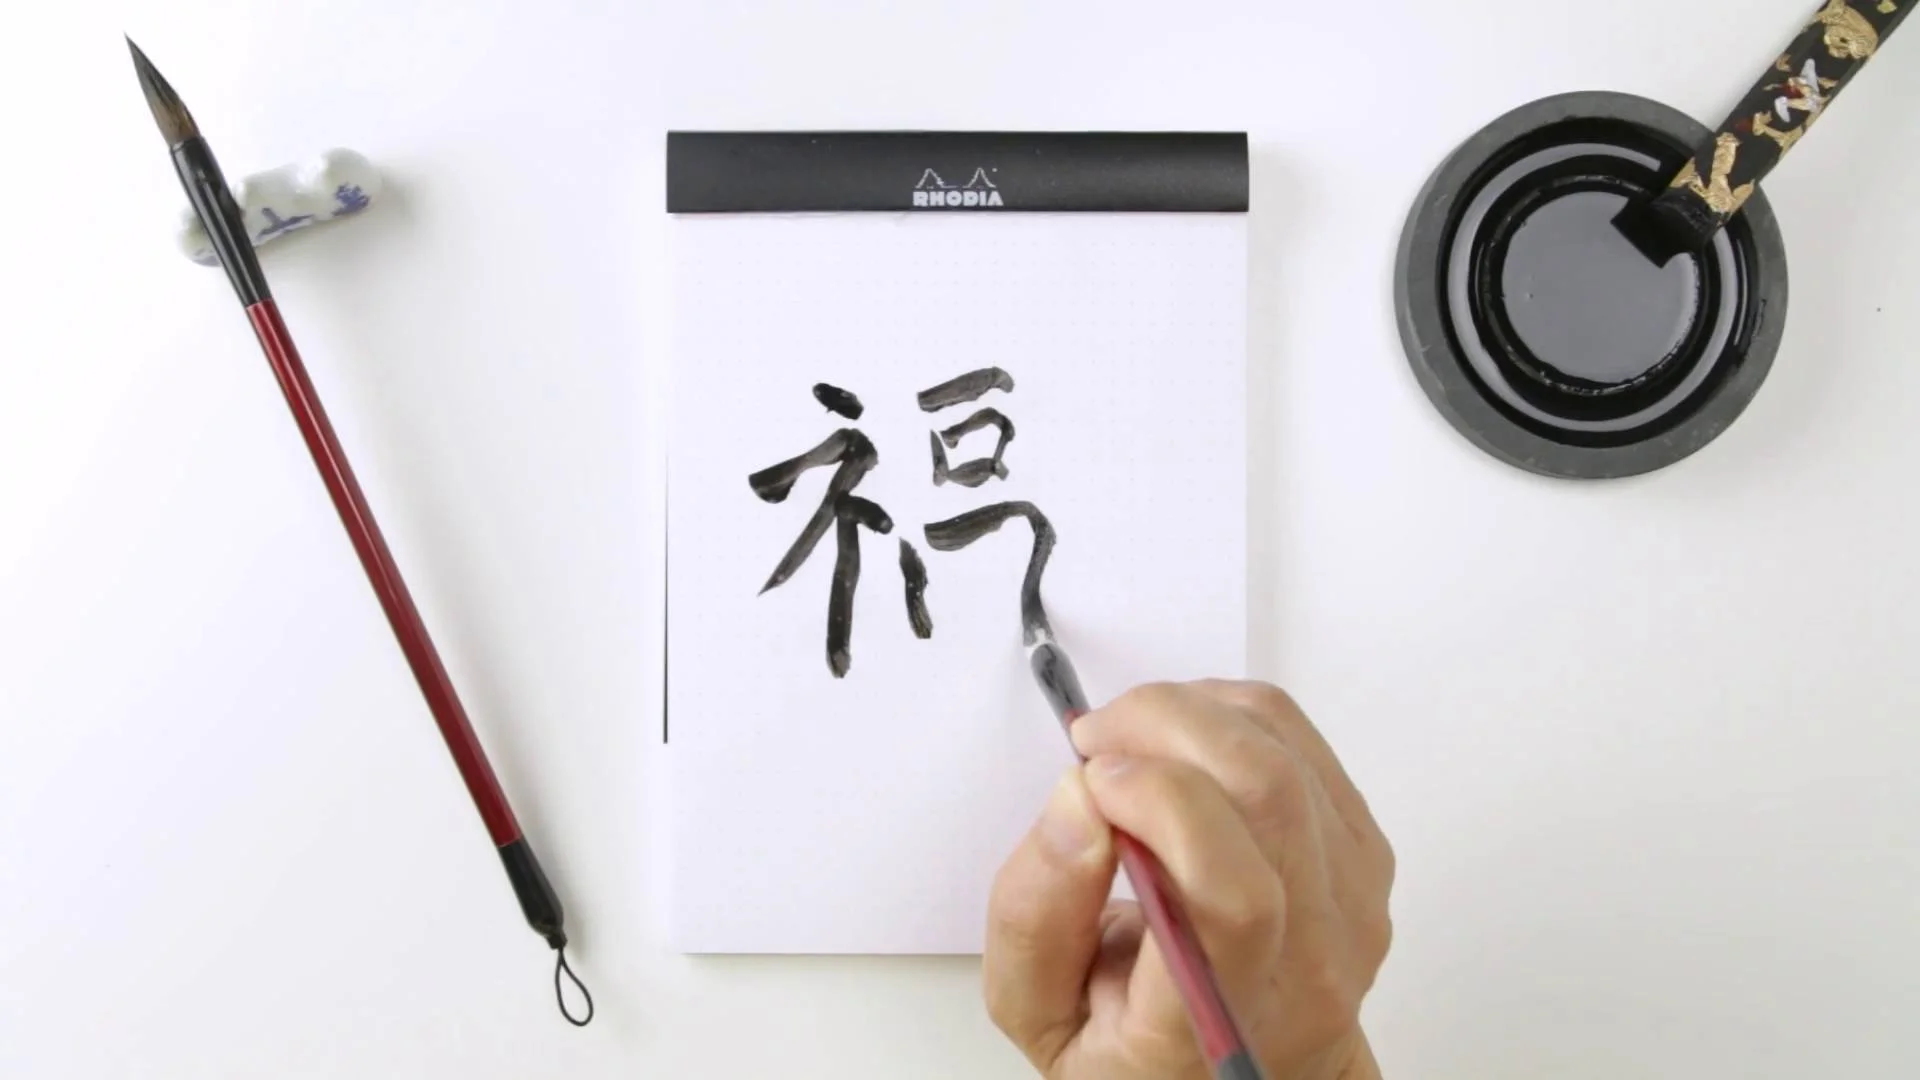 Chinese calligraphy, Description, History, & Facts